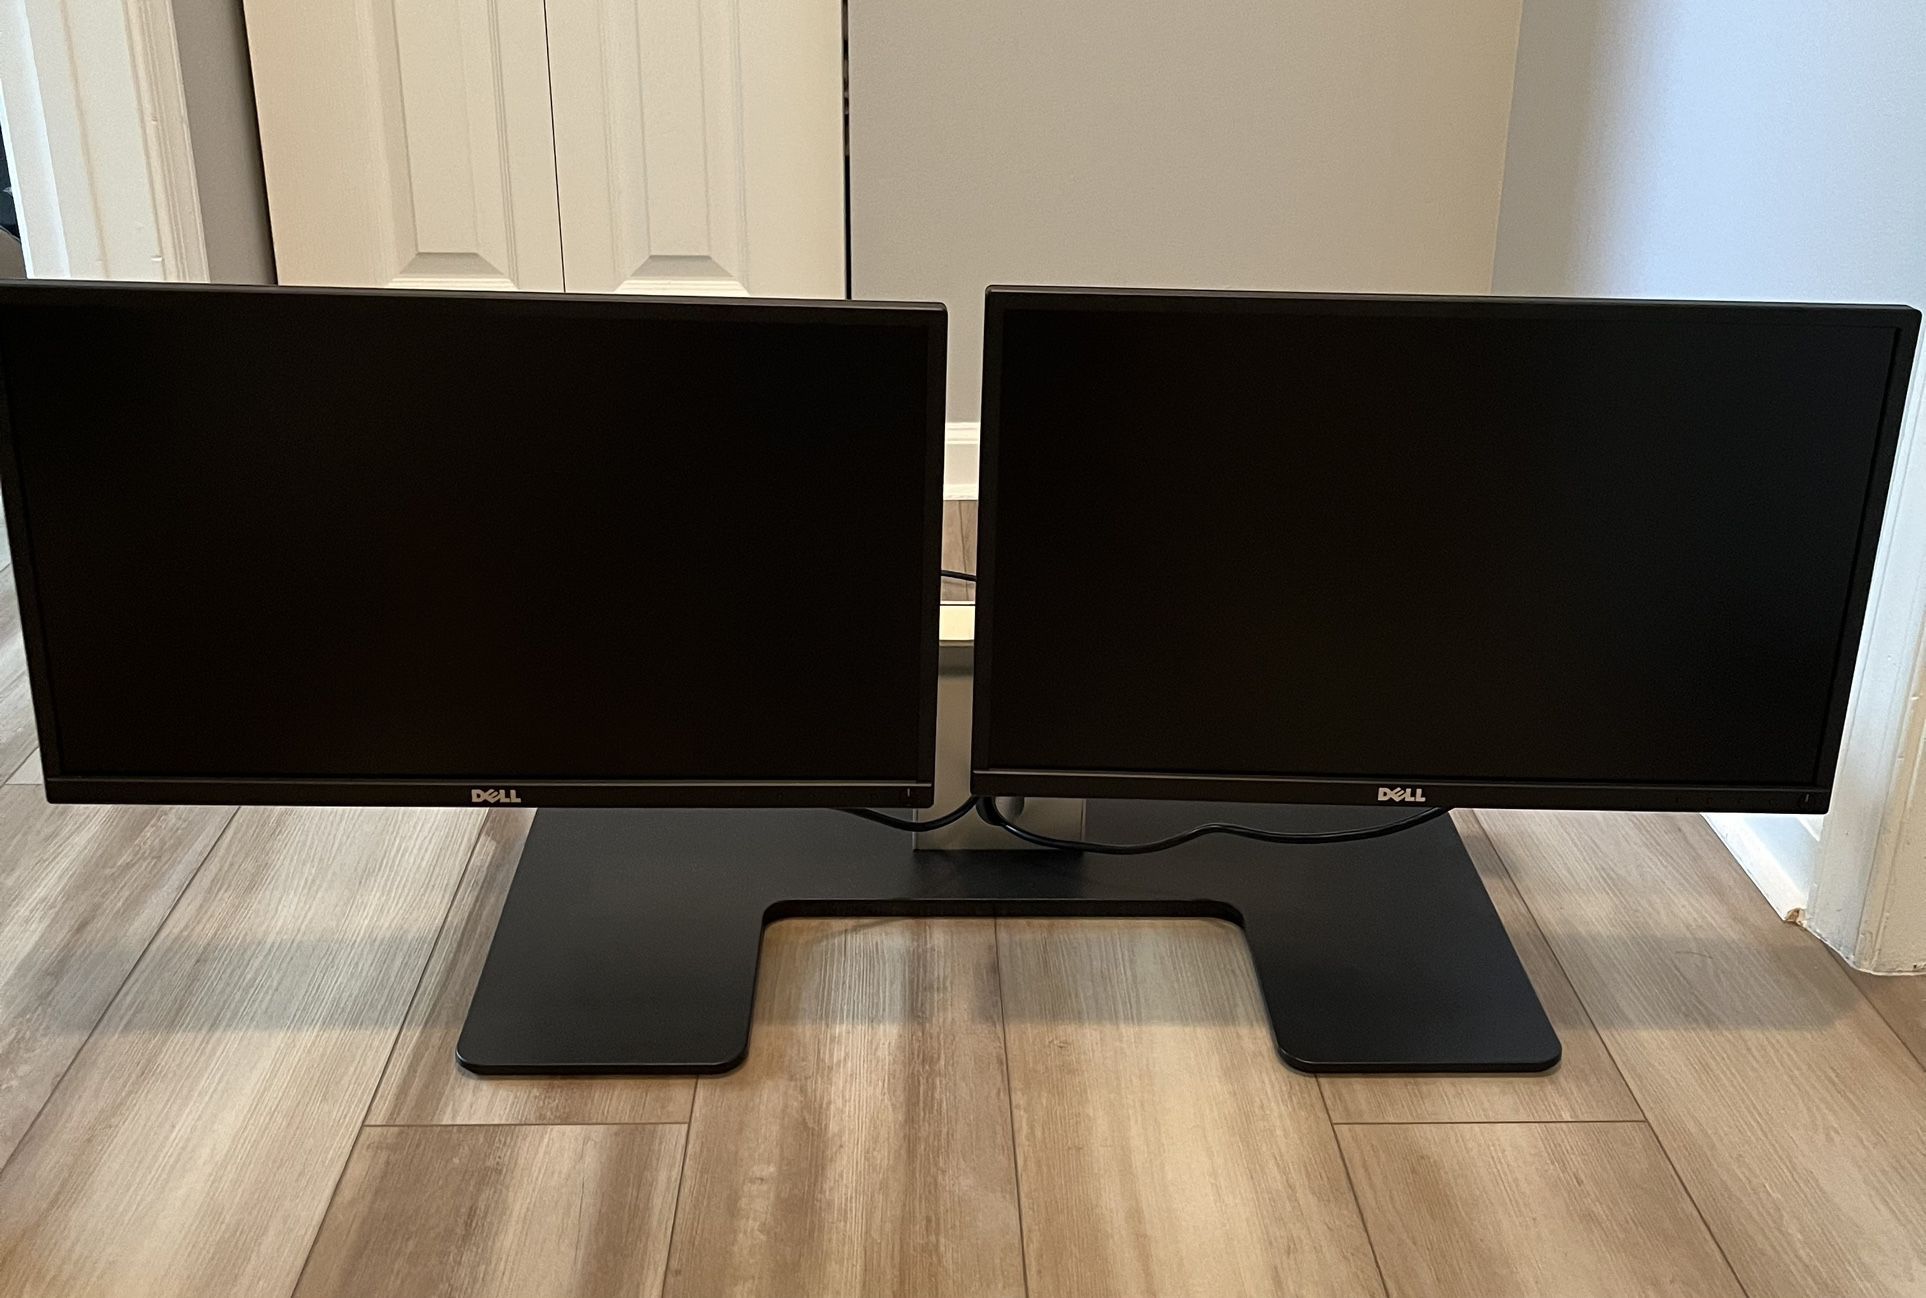 Dell Dual 22” Monitors with Adjustable Stand